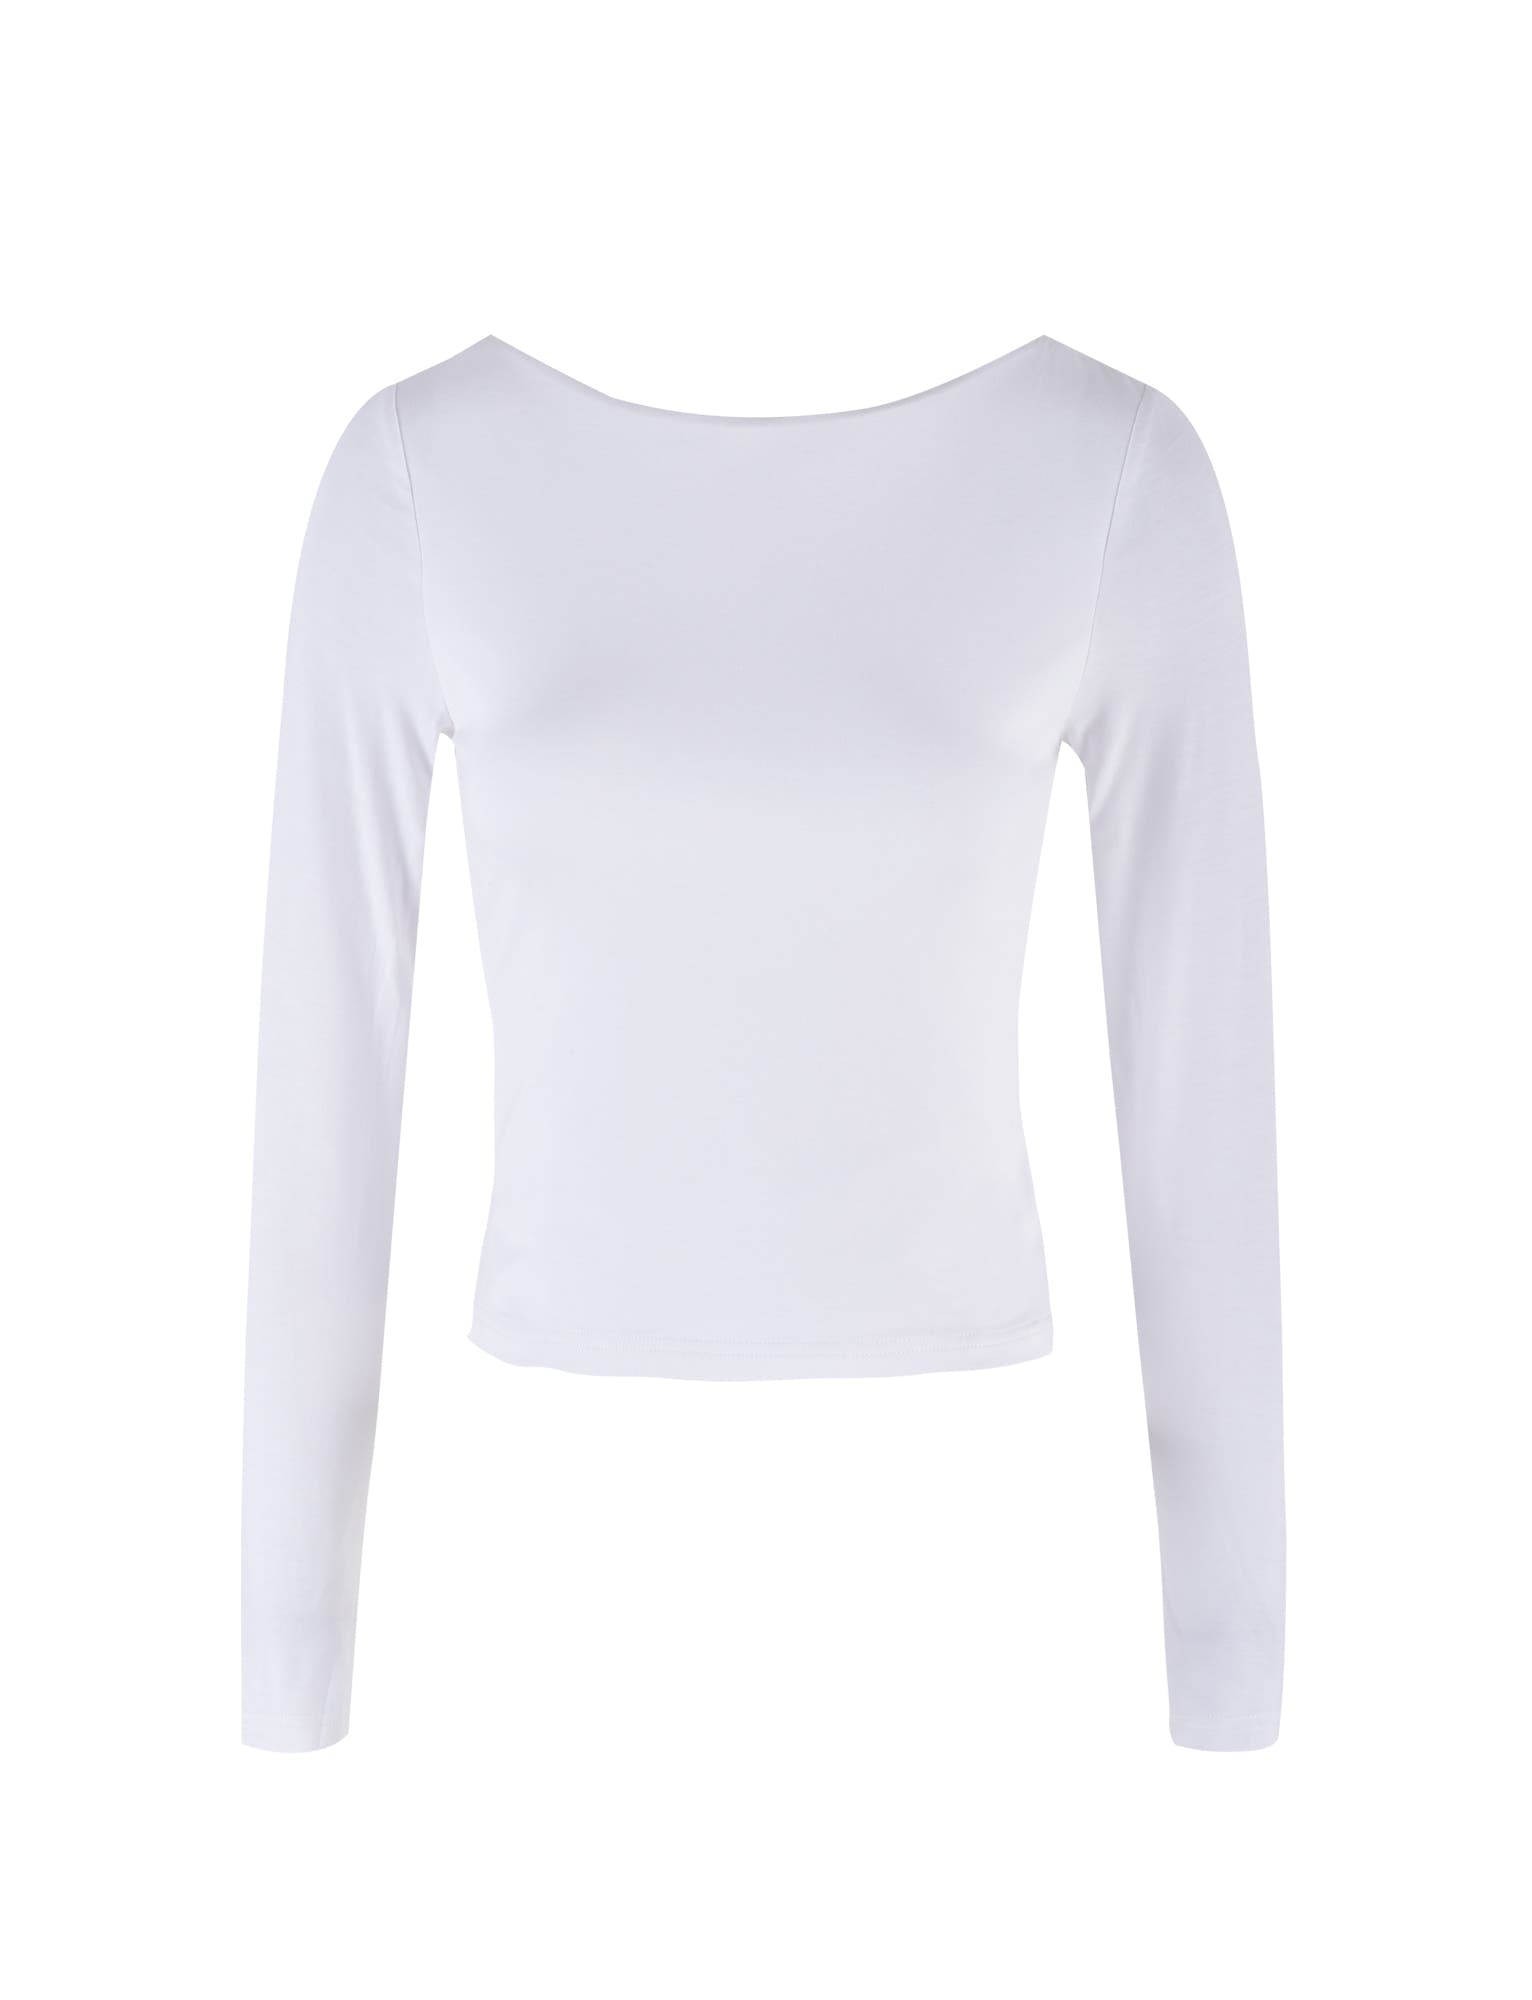 QUINNELL TOP - WHITE – Tiger Mist Rest of World